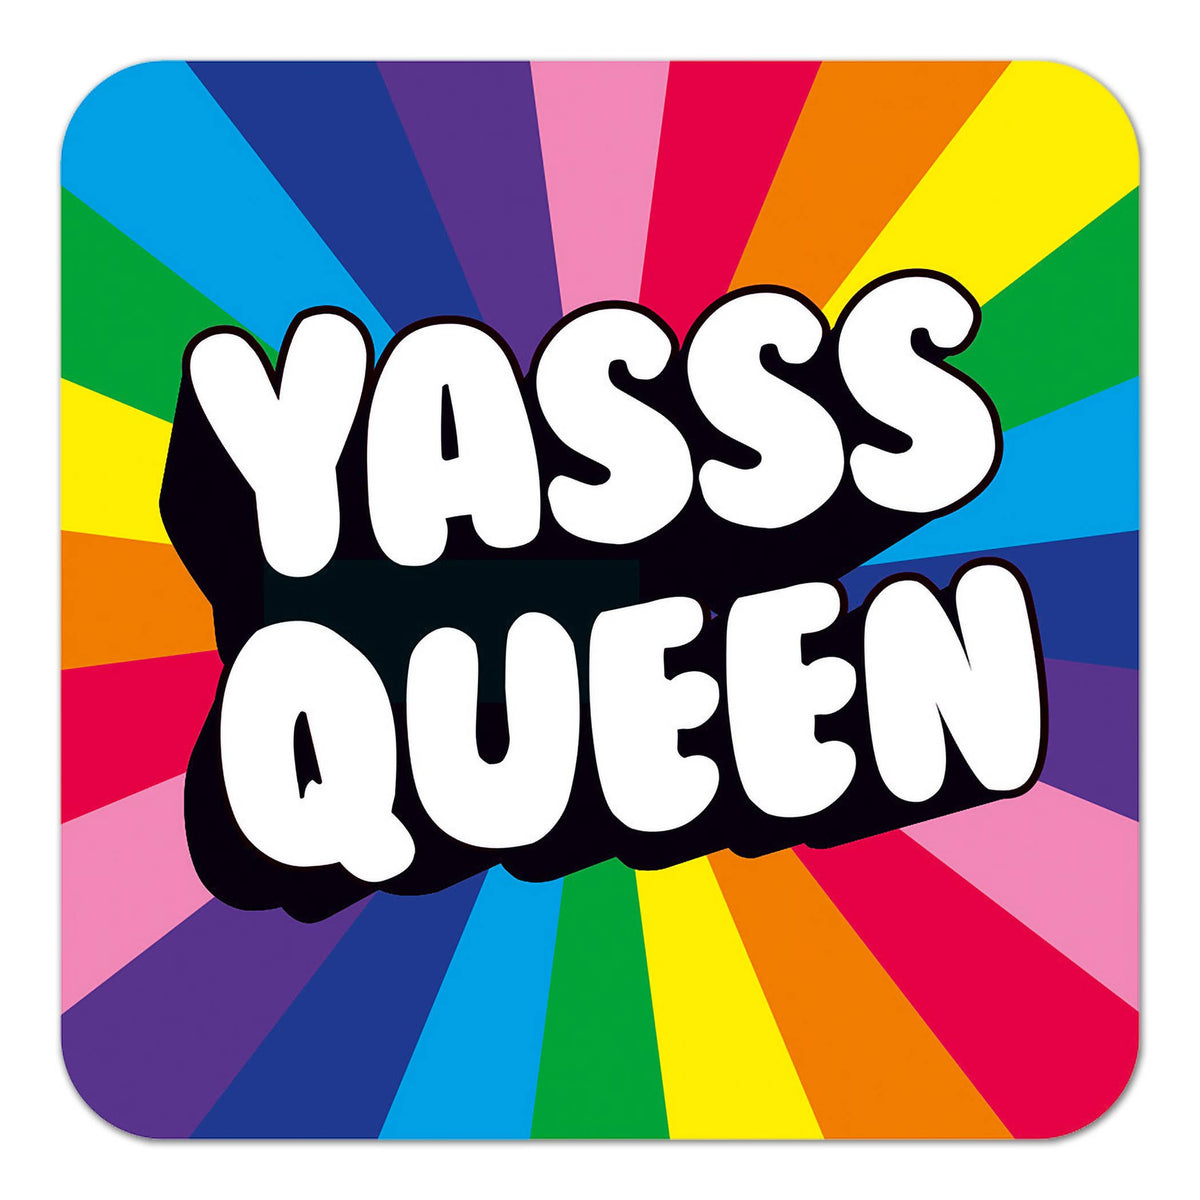 Yasss Queen Funny Coaster